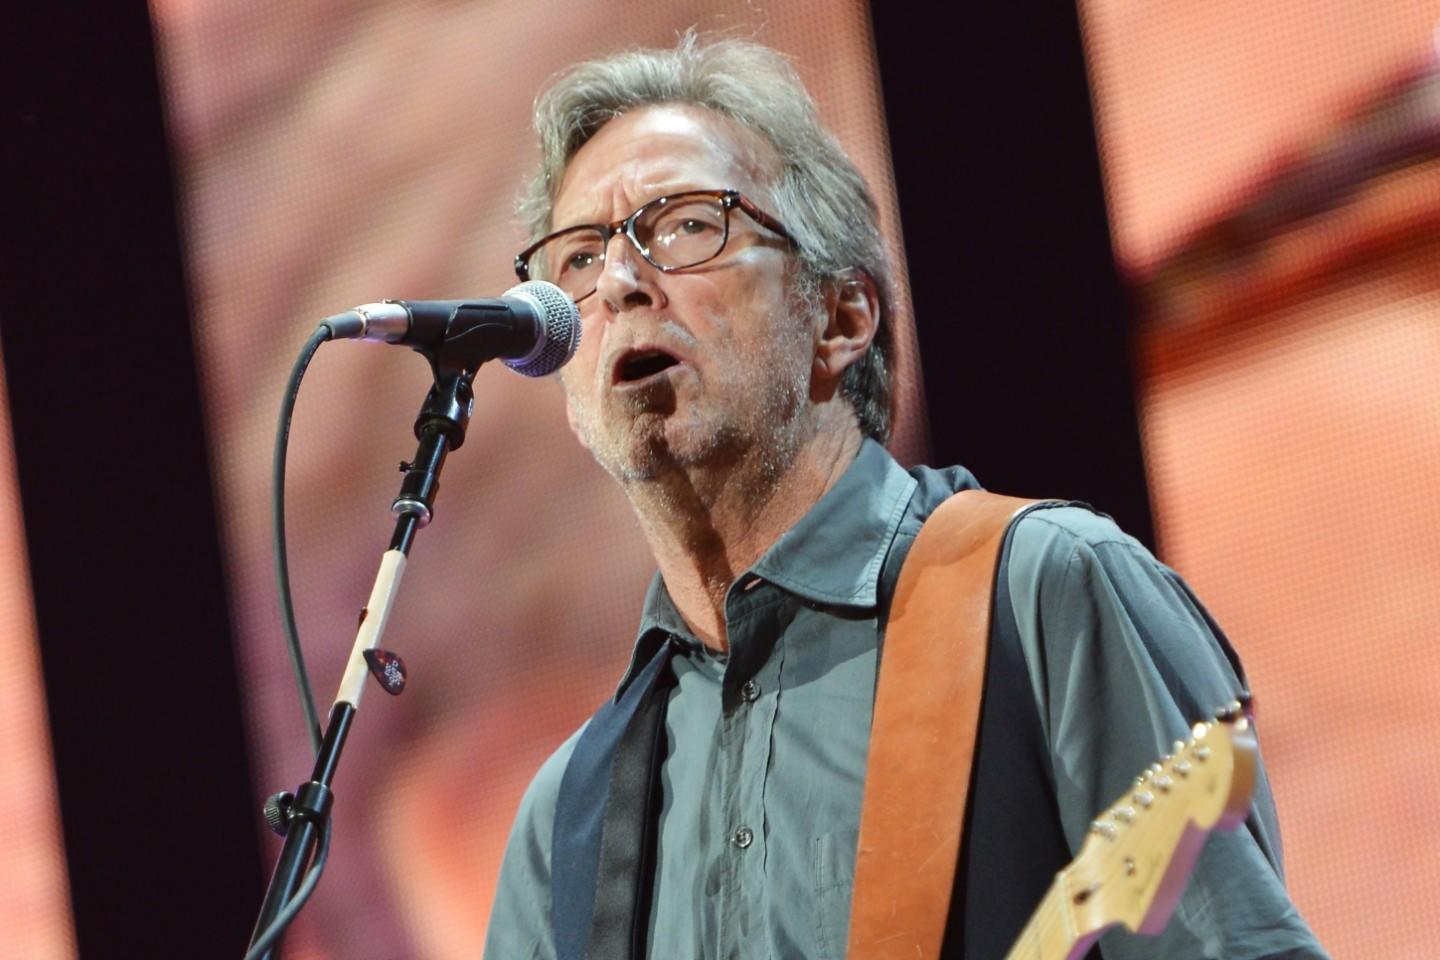 Eric Clapton Tickets | Eric Clapton Tour Dates 2019 and Concert Tickets